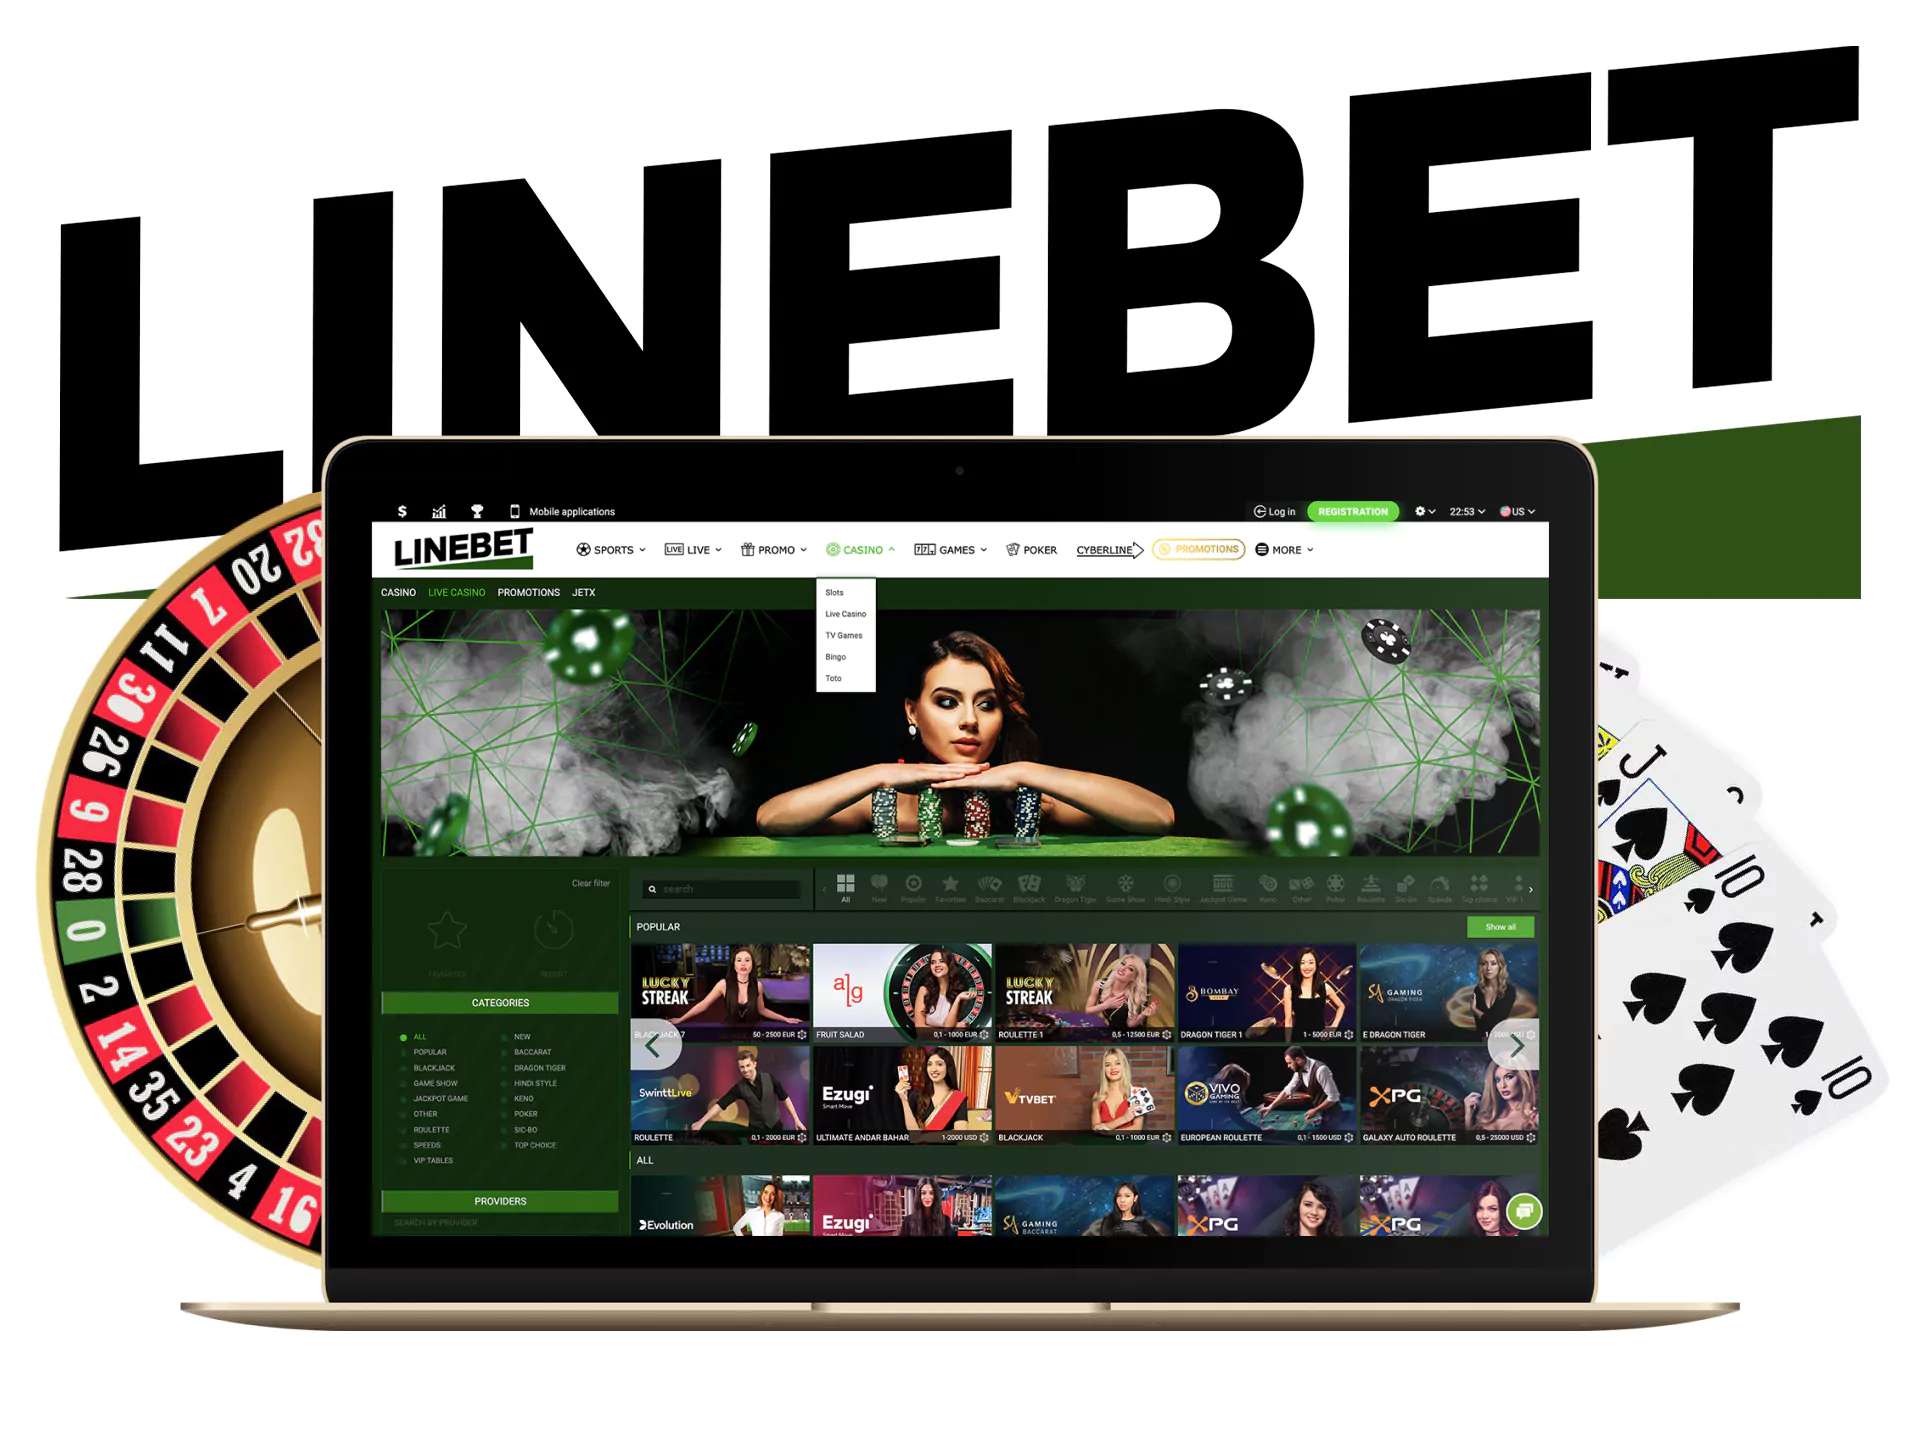 On Linebet, choose between live casino and online casino, enjoy different games.